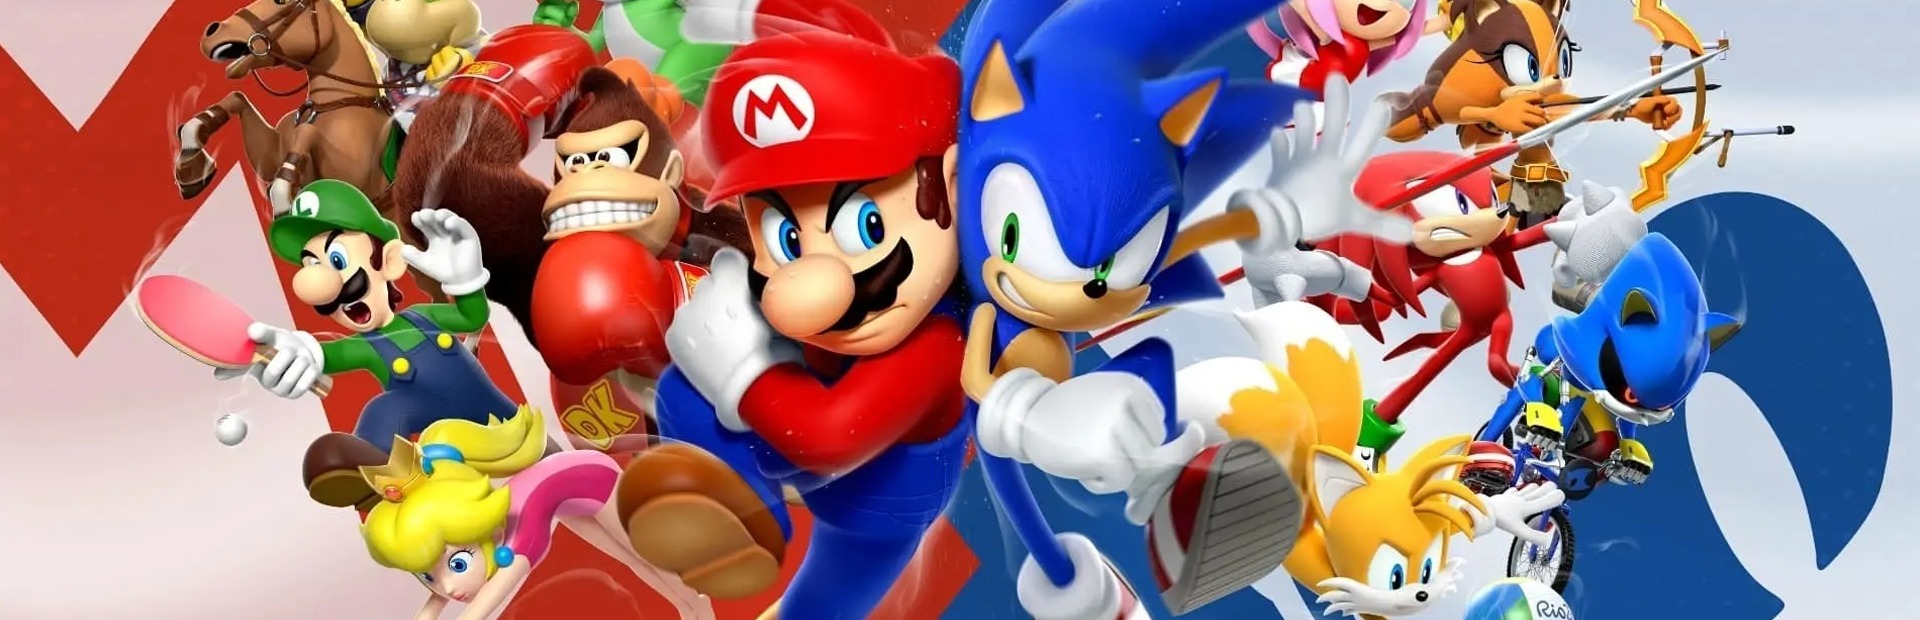 Mario & Sonic at the Olympic Games Switch Switch